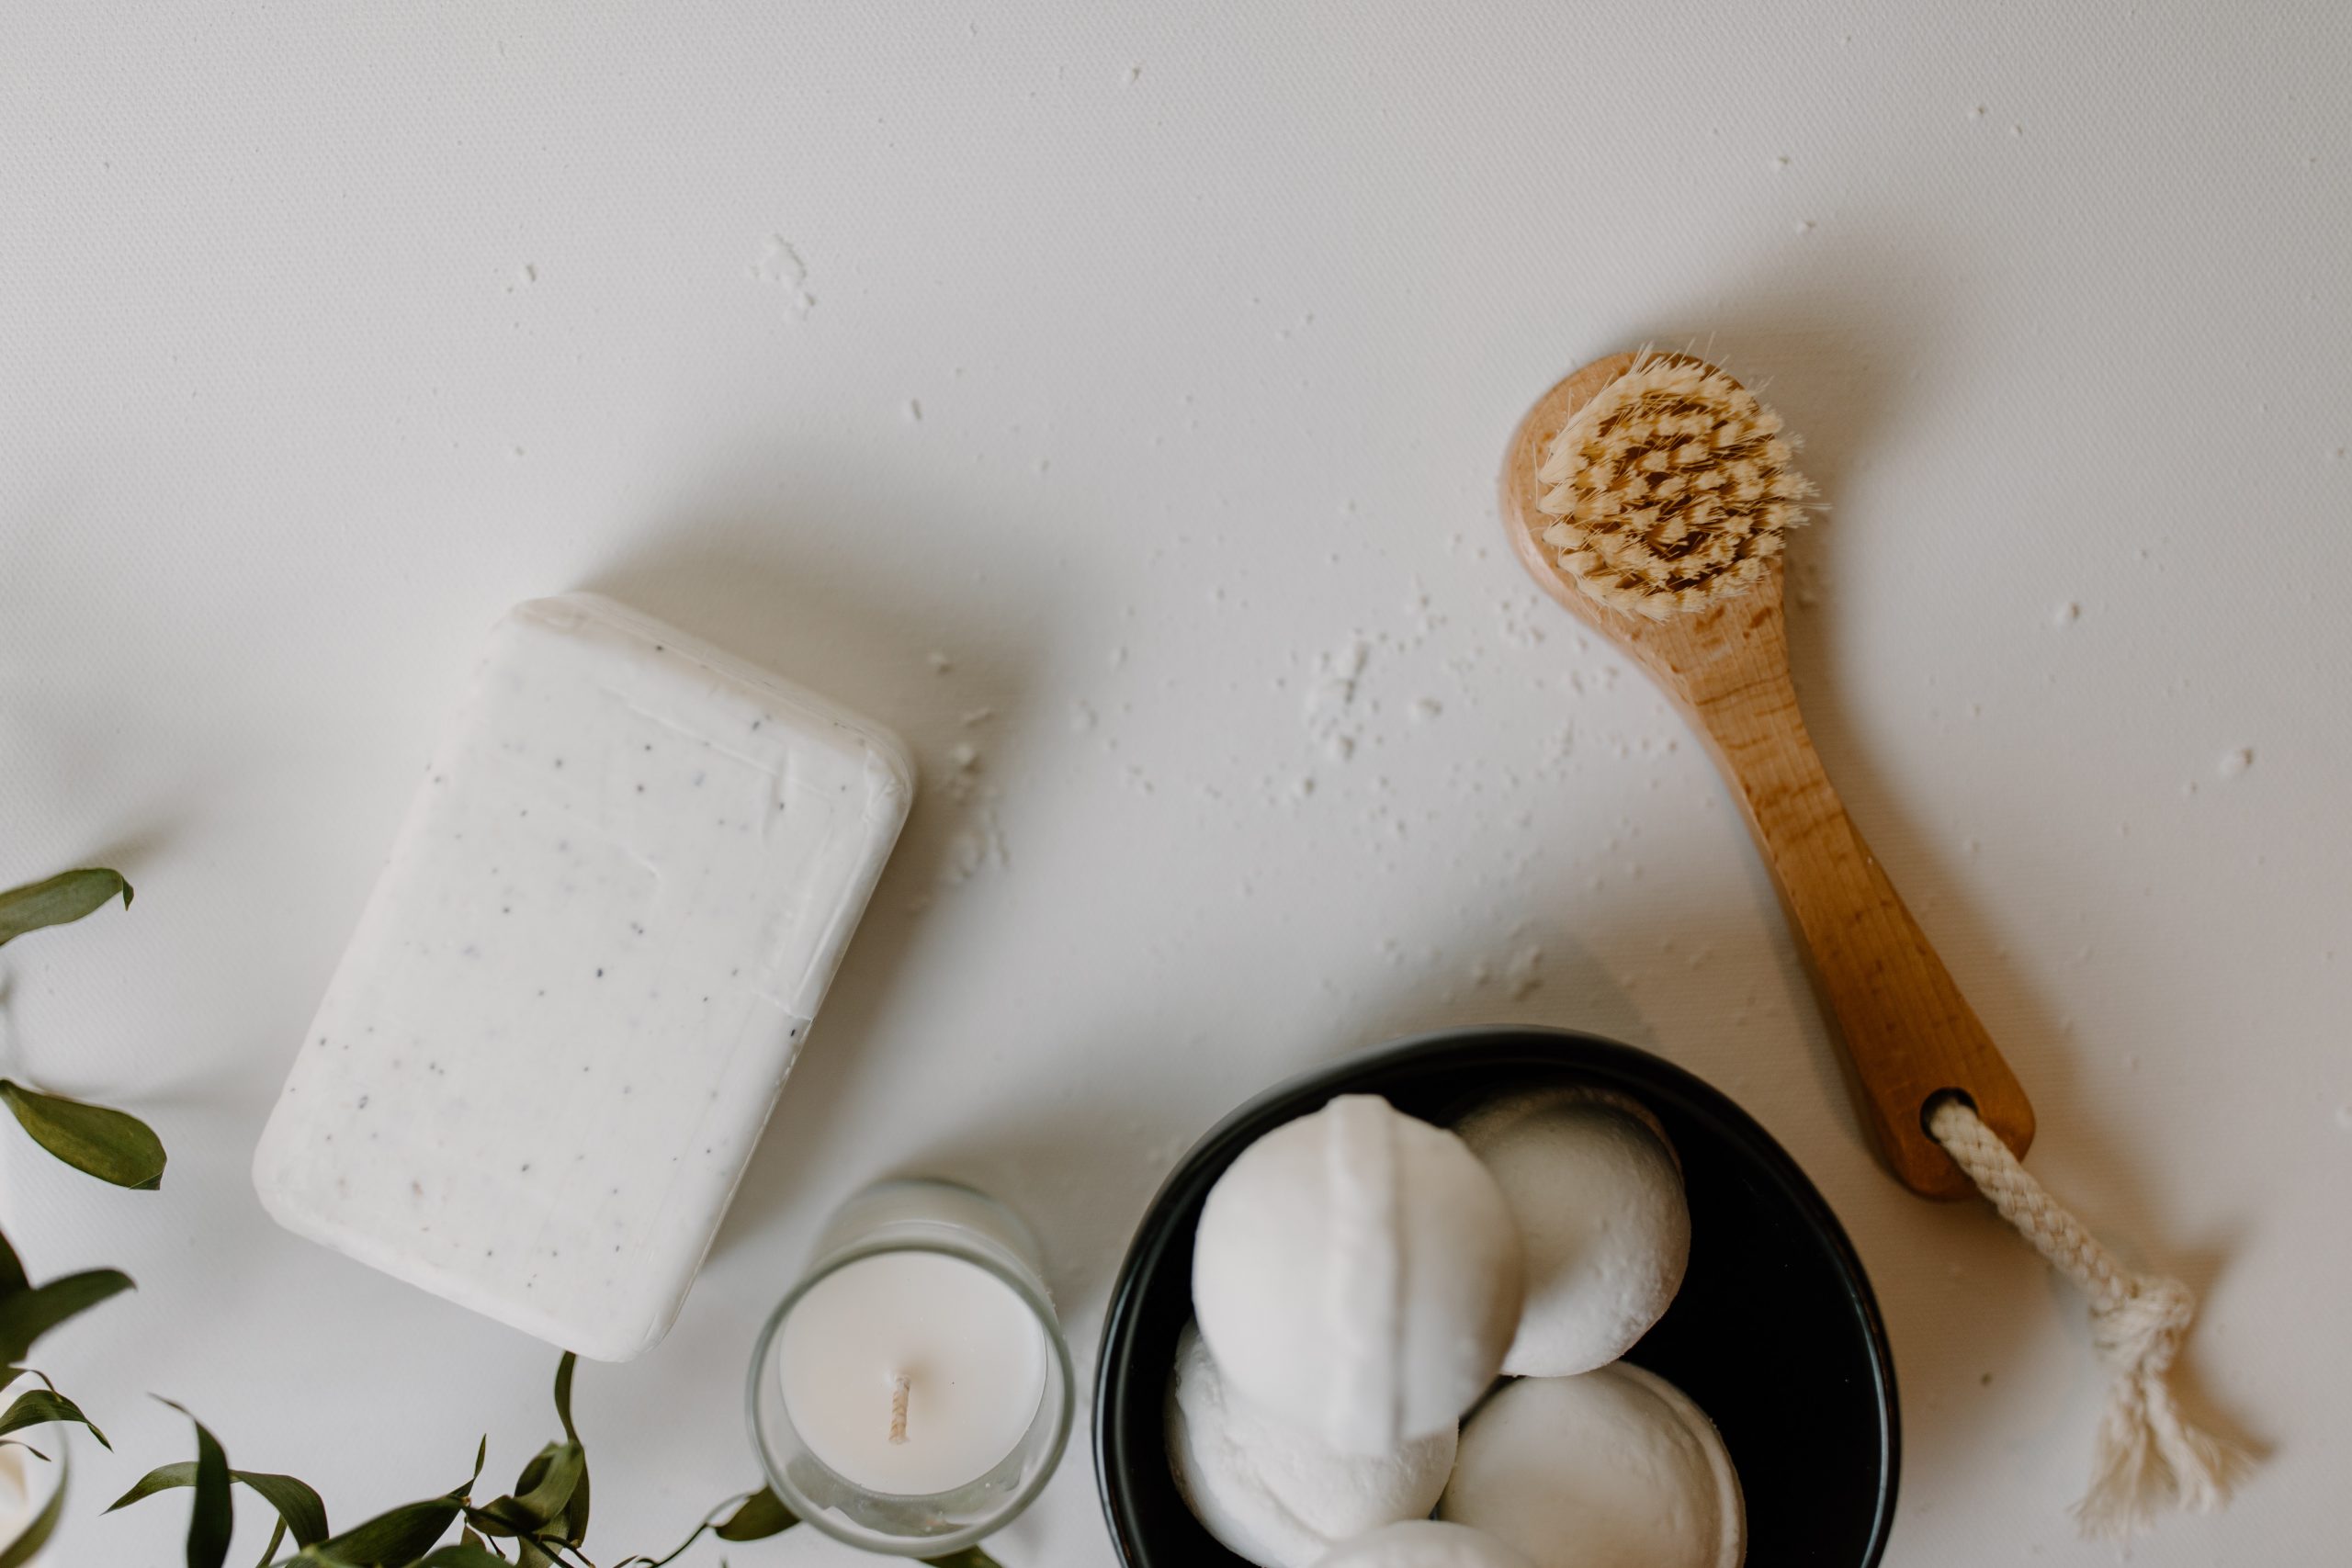 How to make soap? Ways to make natural cosmetics